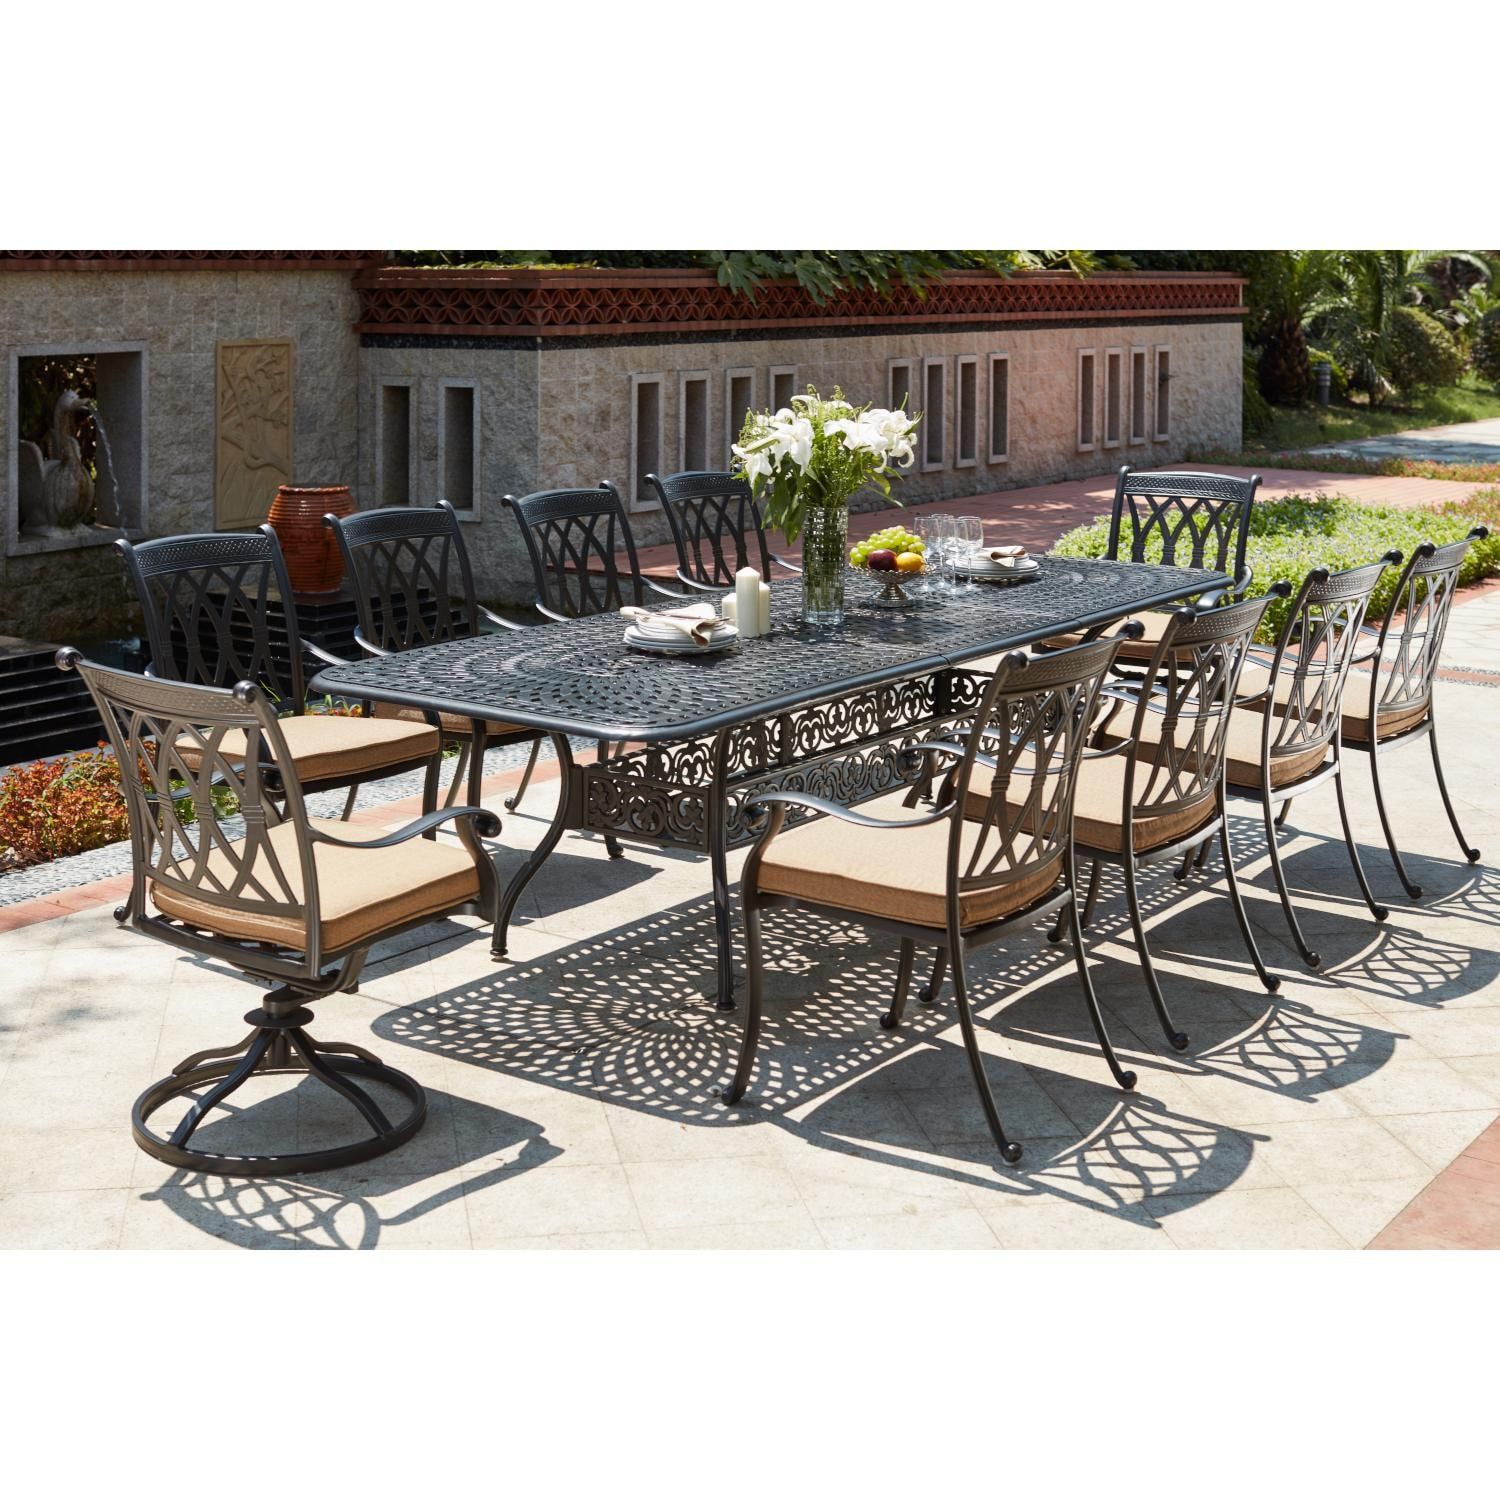 Capri 11 Piece Cast Aluminum Patio Dining Set W/ 92 X 42 Inch Pertaining To 11 Piece Extendable Patio Dining Sets (View 8 of 15)